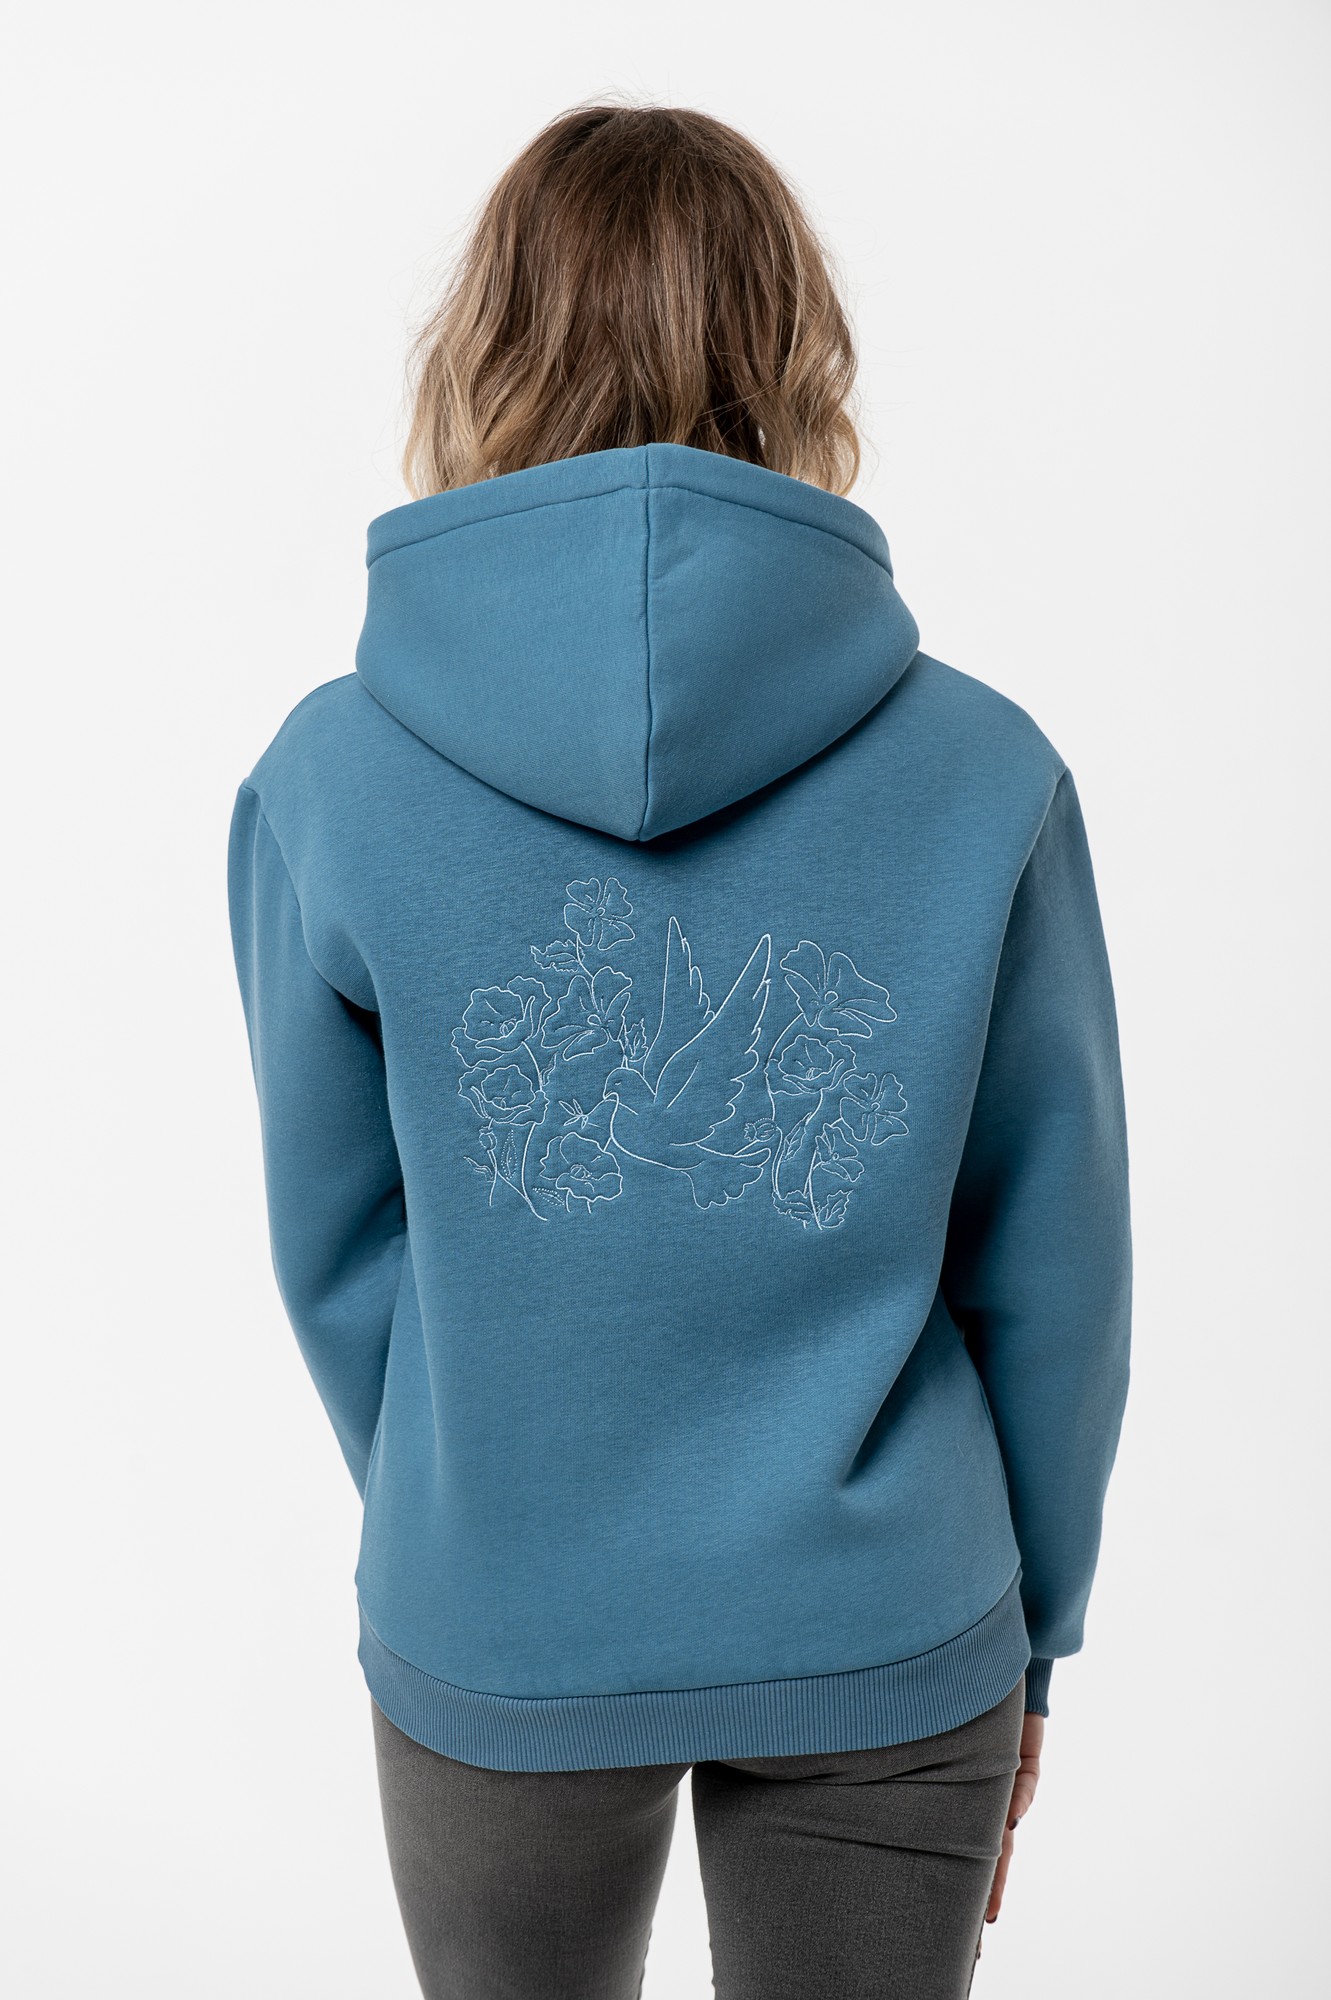 Women's hoodie with embroidery "Dove of peace" blue